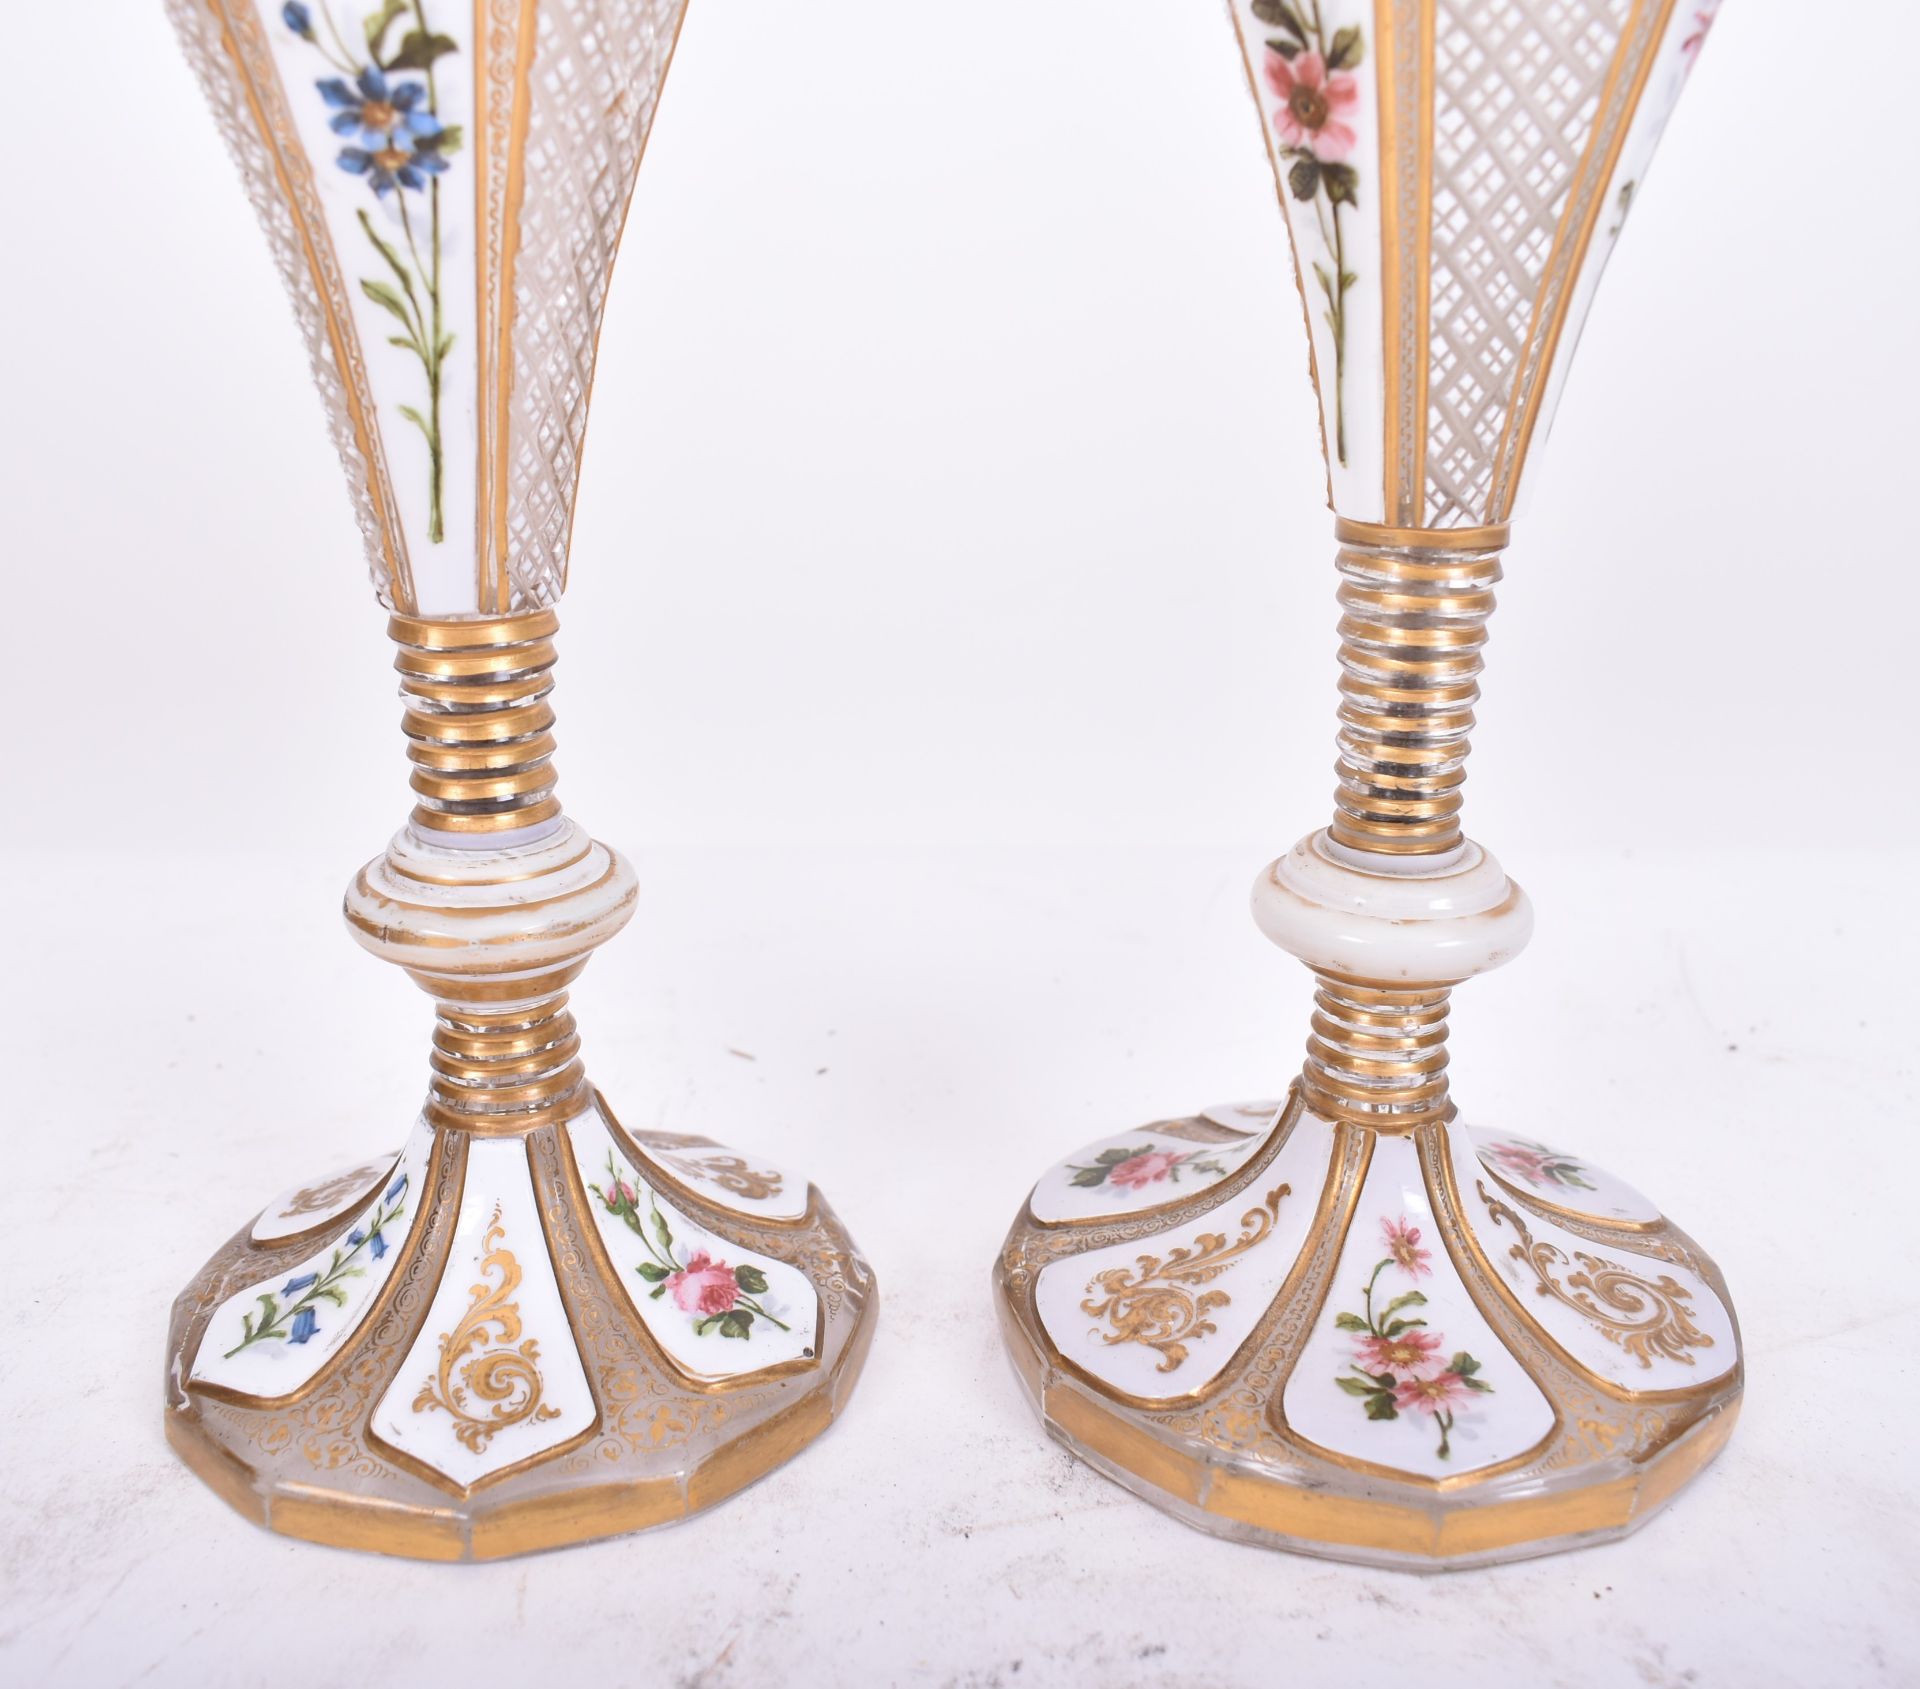 PAIR OF 19TH CENTURY BOHEMIAN CZECH OVERLAY GLASS VASES - Image 4 of 8